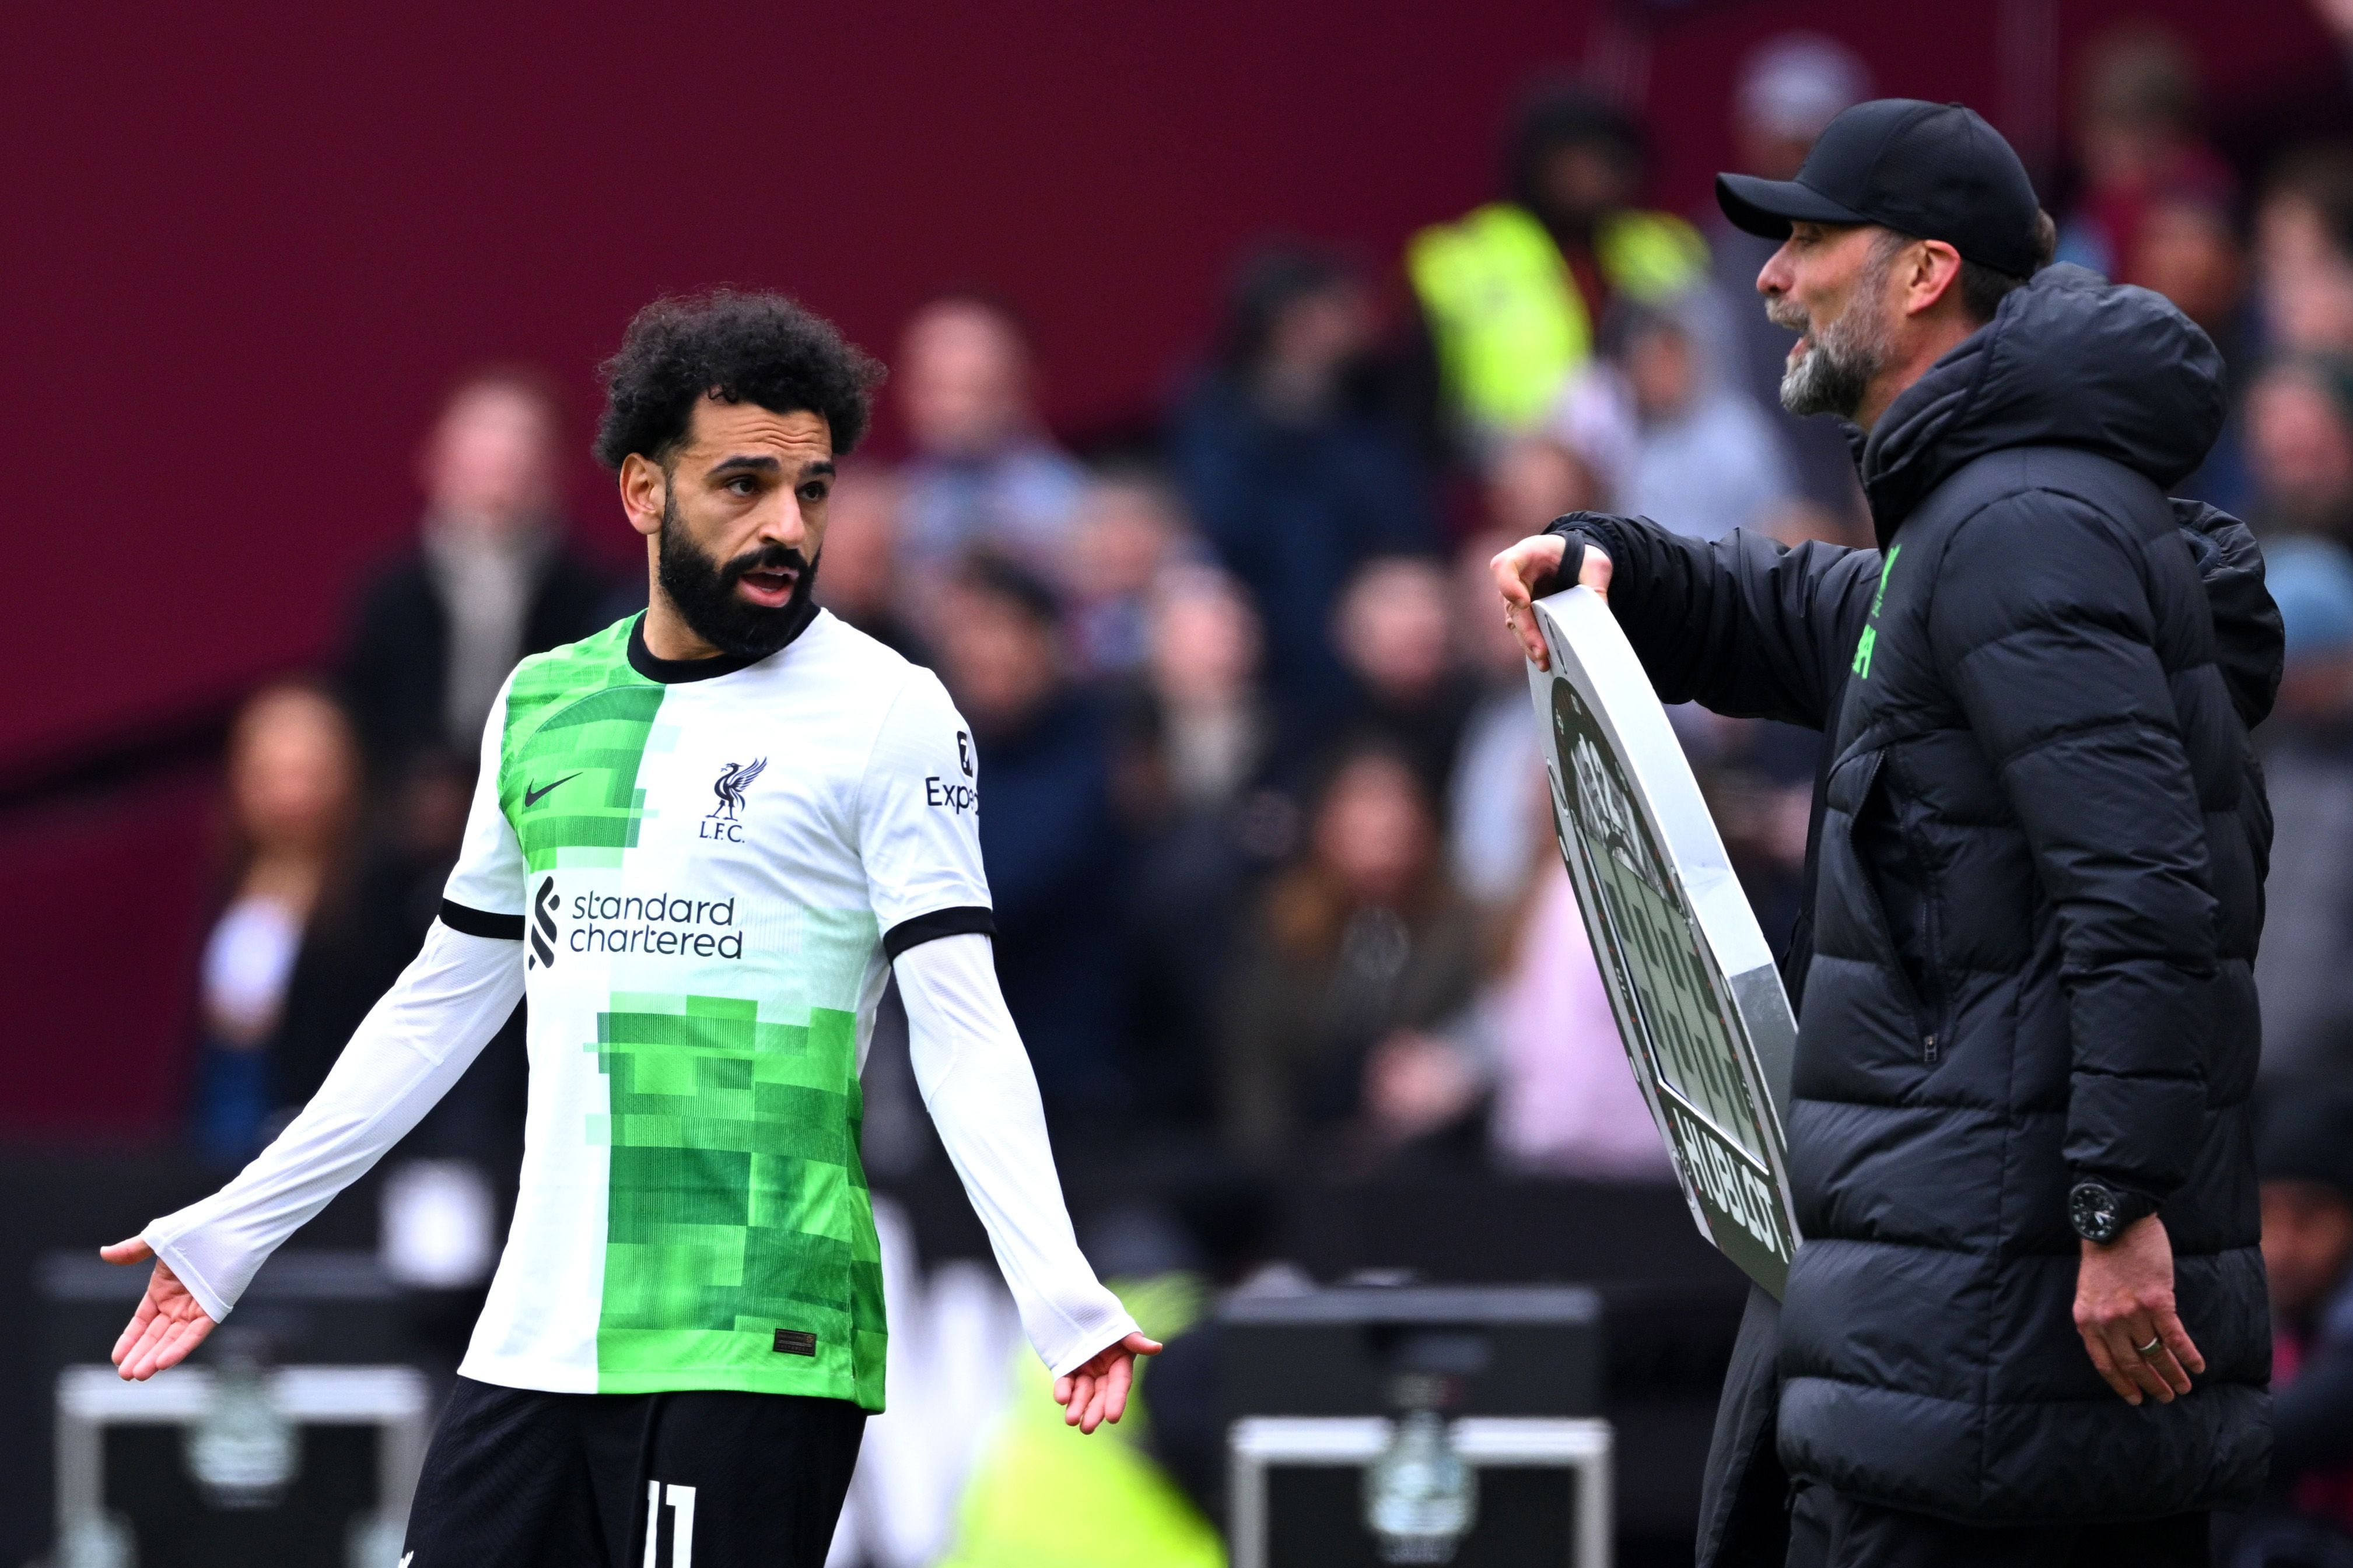 jurgen klopp clashes with mohamed salah as liverpool's title hopes take another hit